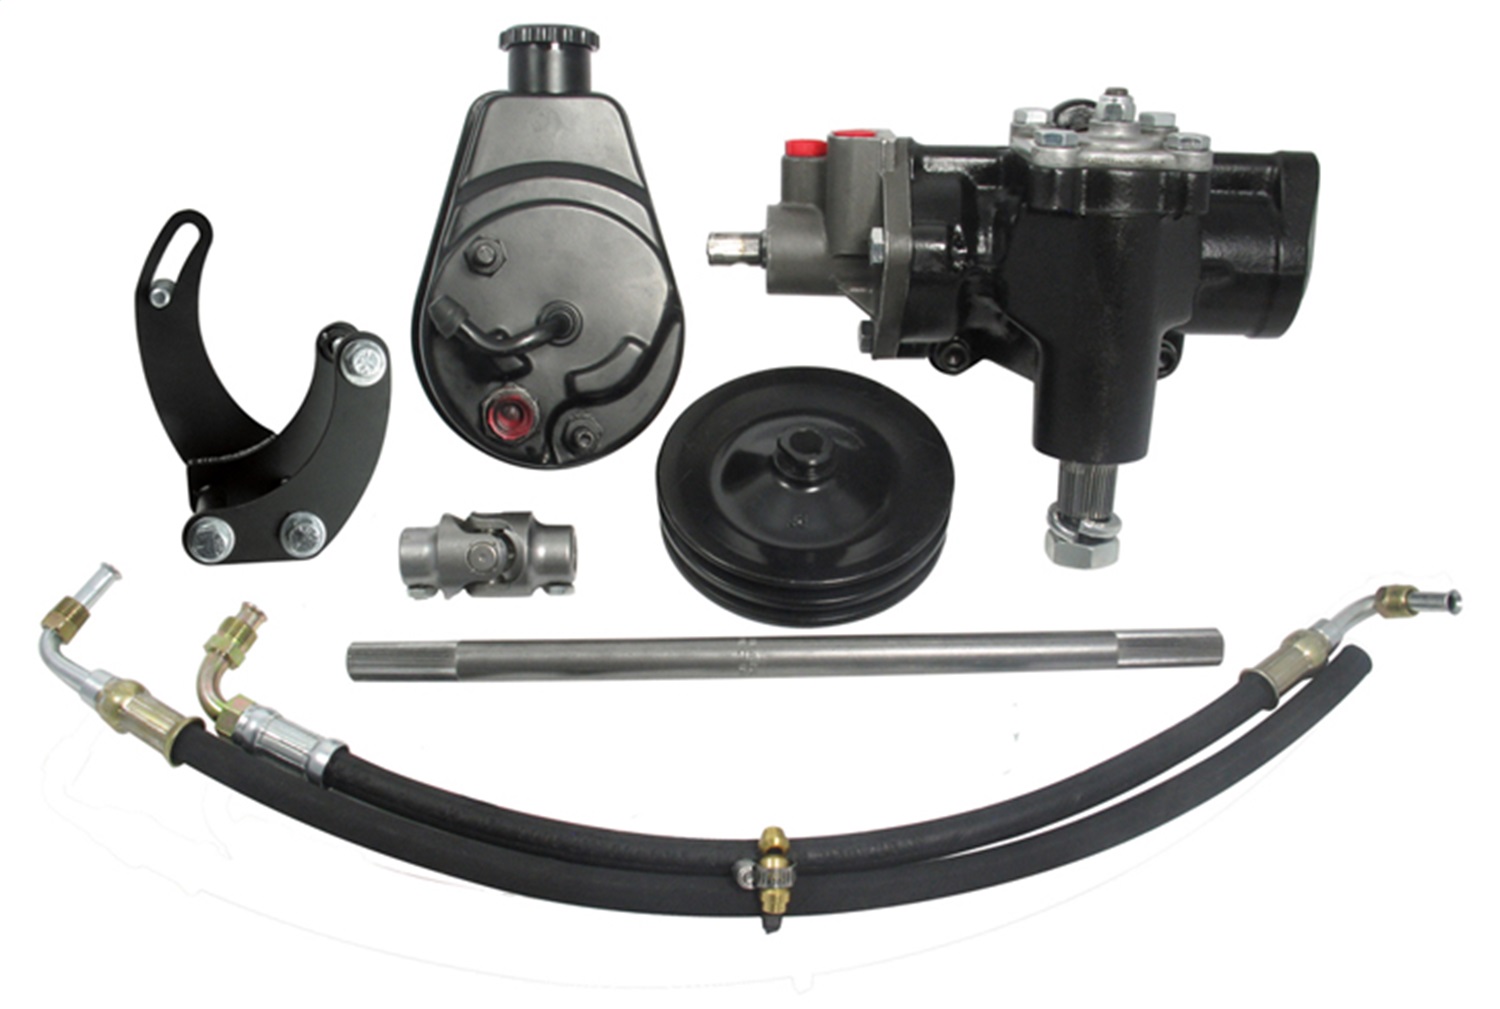 Power Steering Conversion Kit; 58-64 Chevy Cars; Delphi 600 Series; Complete Kit - 999014